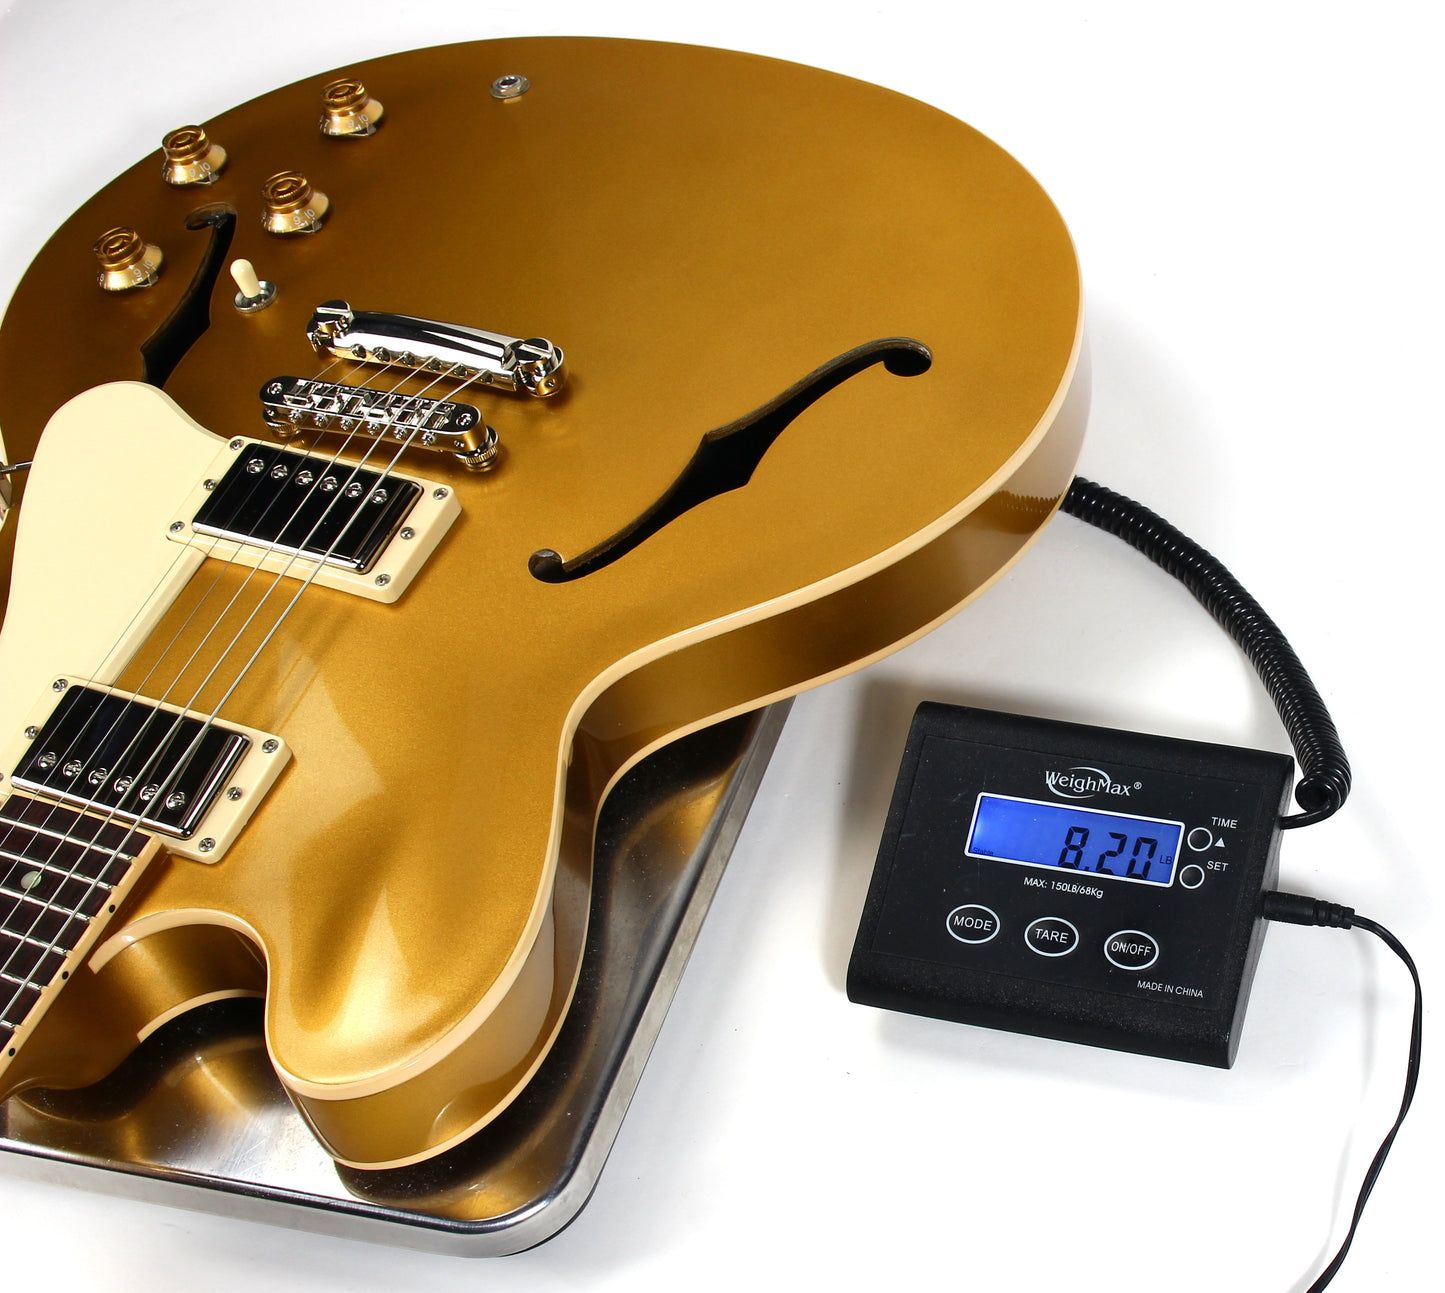 2013 Gibson Custom Memphis ES-335 All Gold Limited Edition